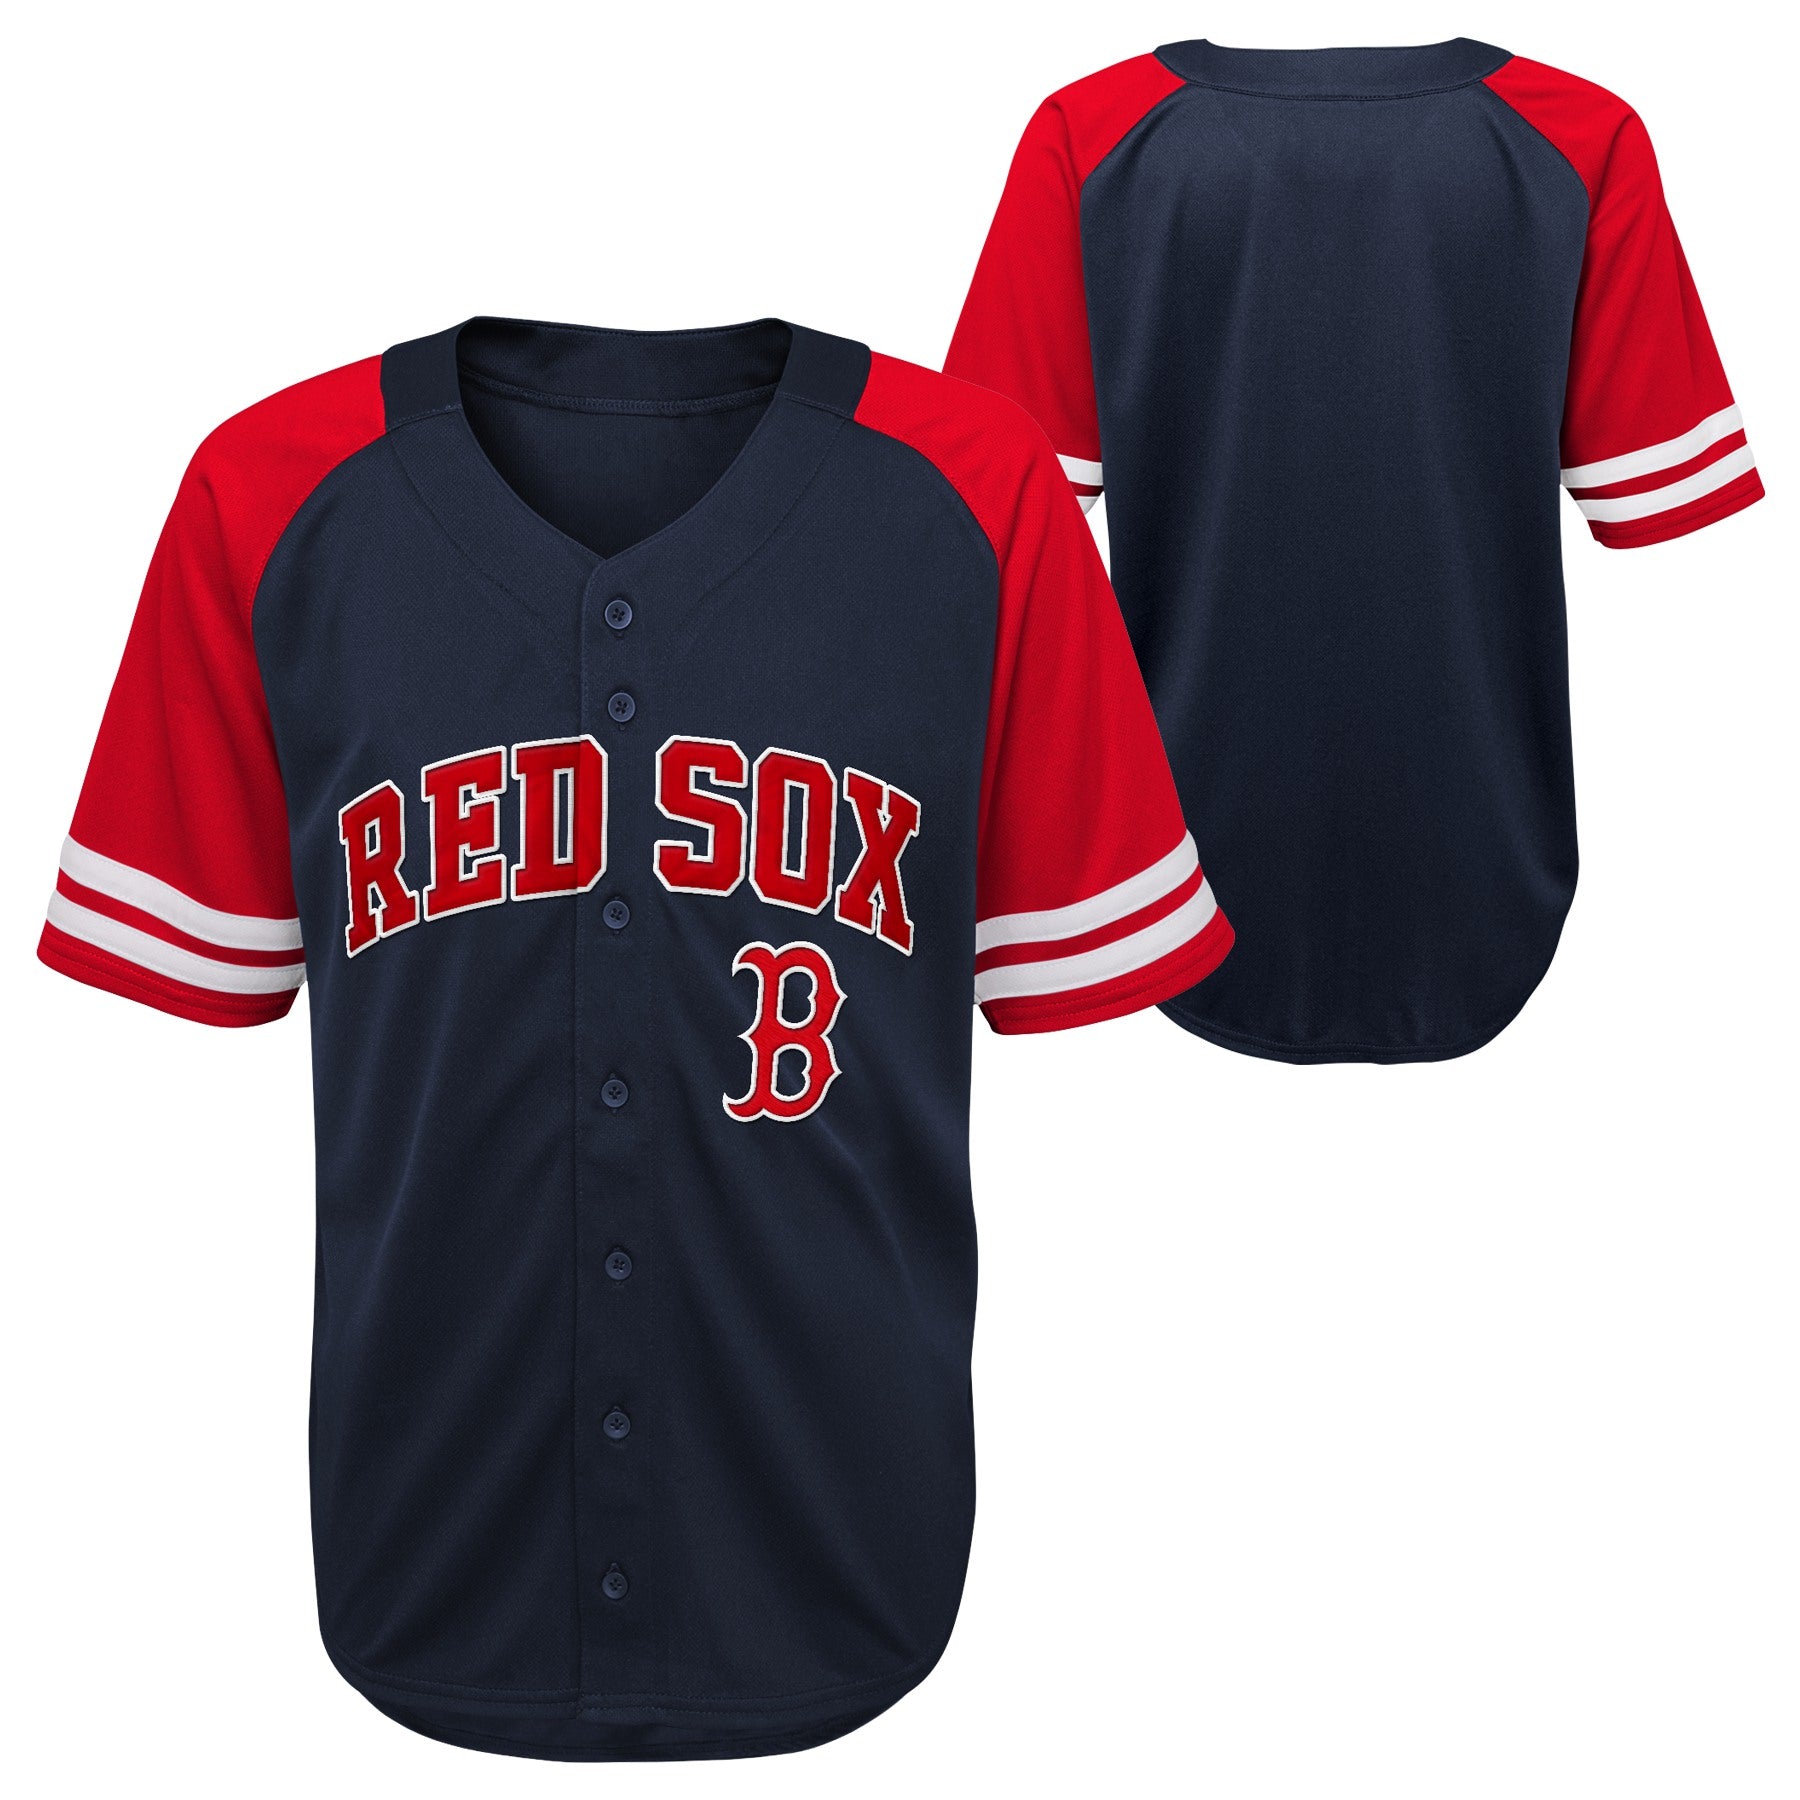 Outerstuff MLB Kids Boston Red Sox Button Up Baseball Team Home